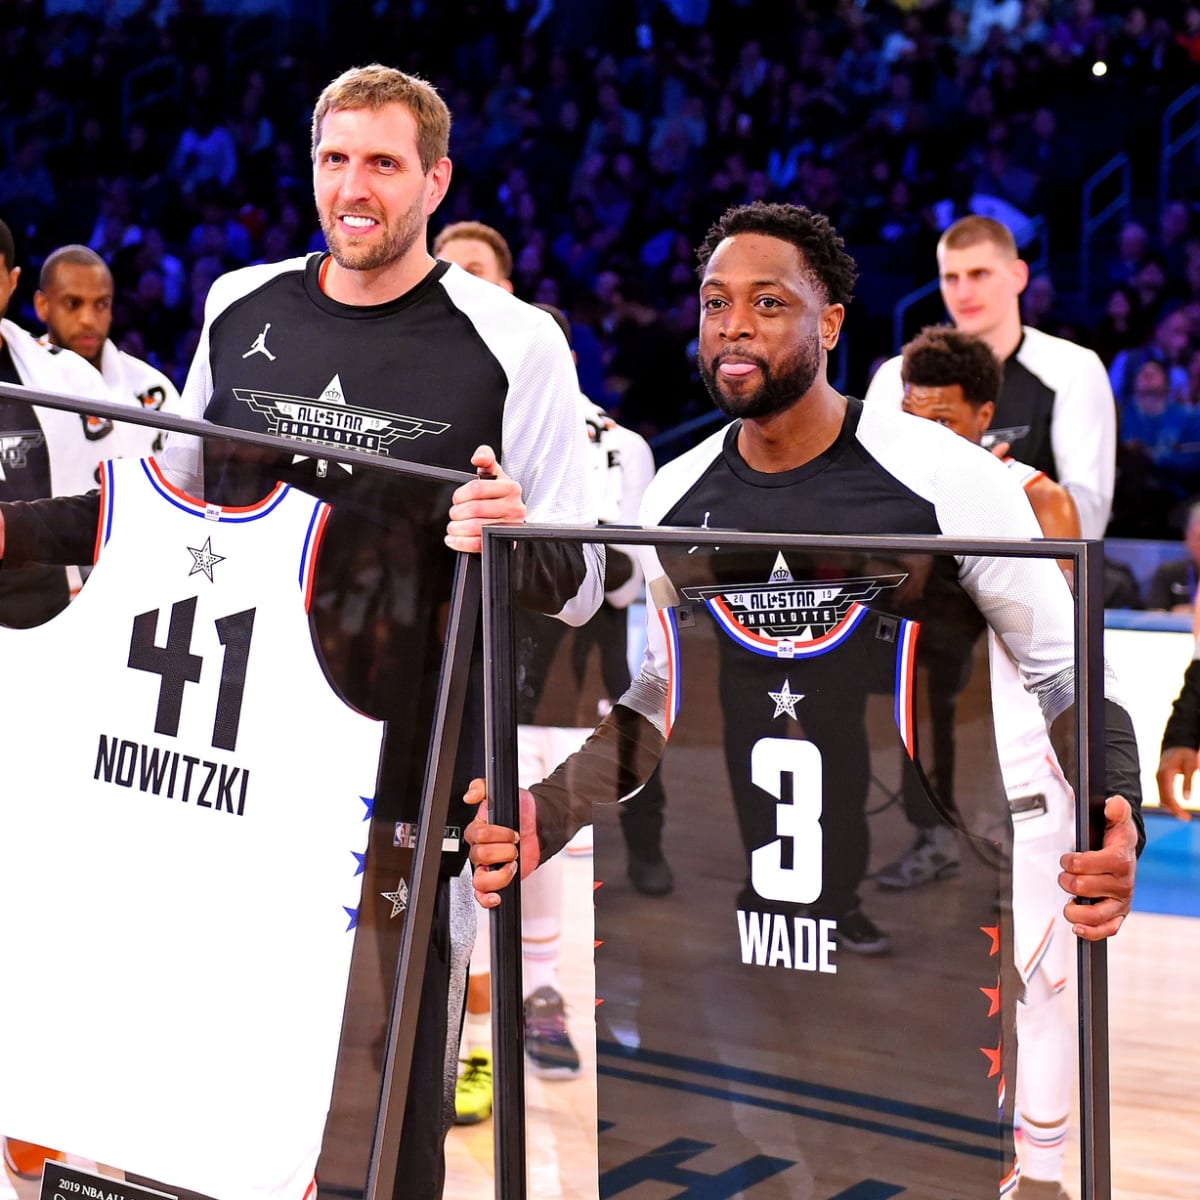 Mocked By Dwyane Wade, LeBron James In 2011 Finals, Dirk Nowitzki Responds  - Sports Illustrated Dallas Mavericks News, Analysis and More